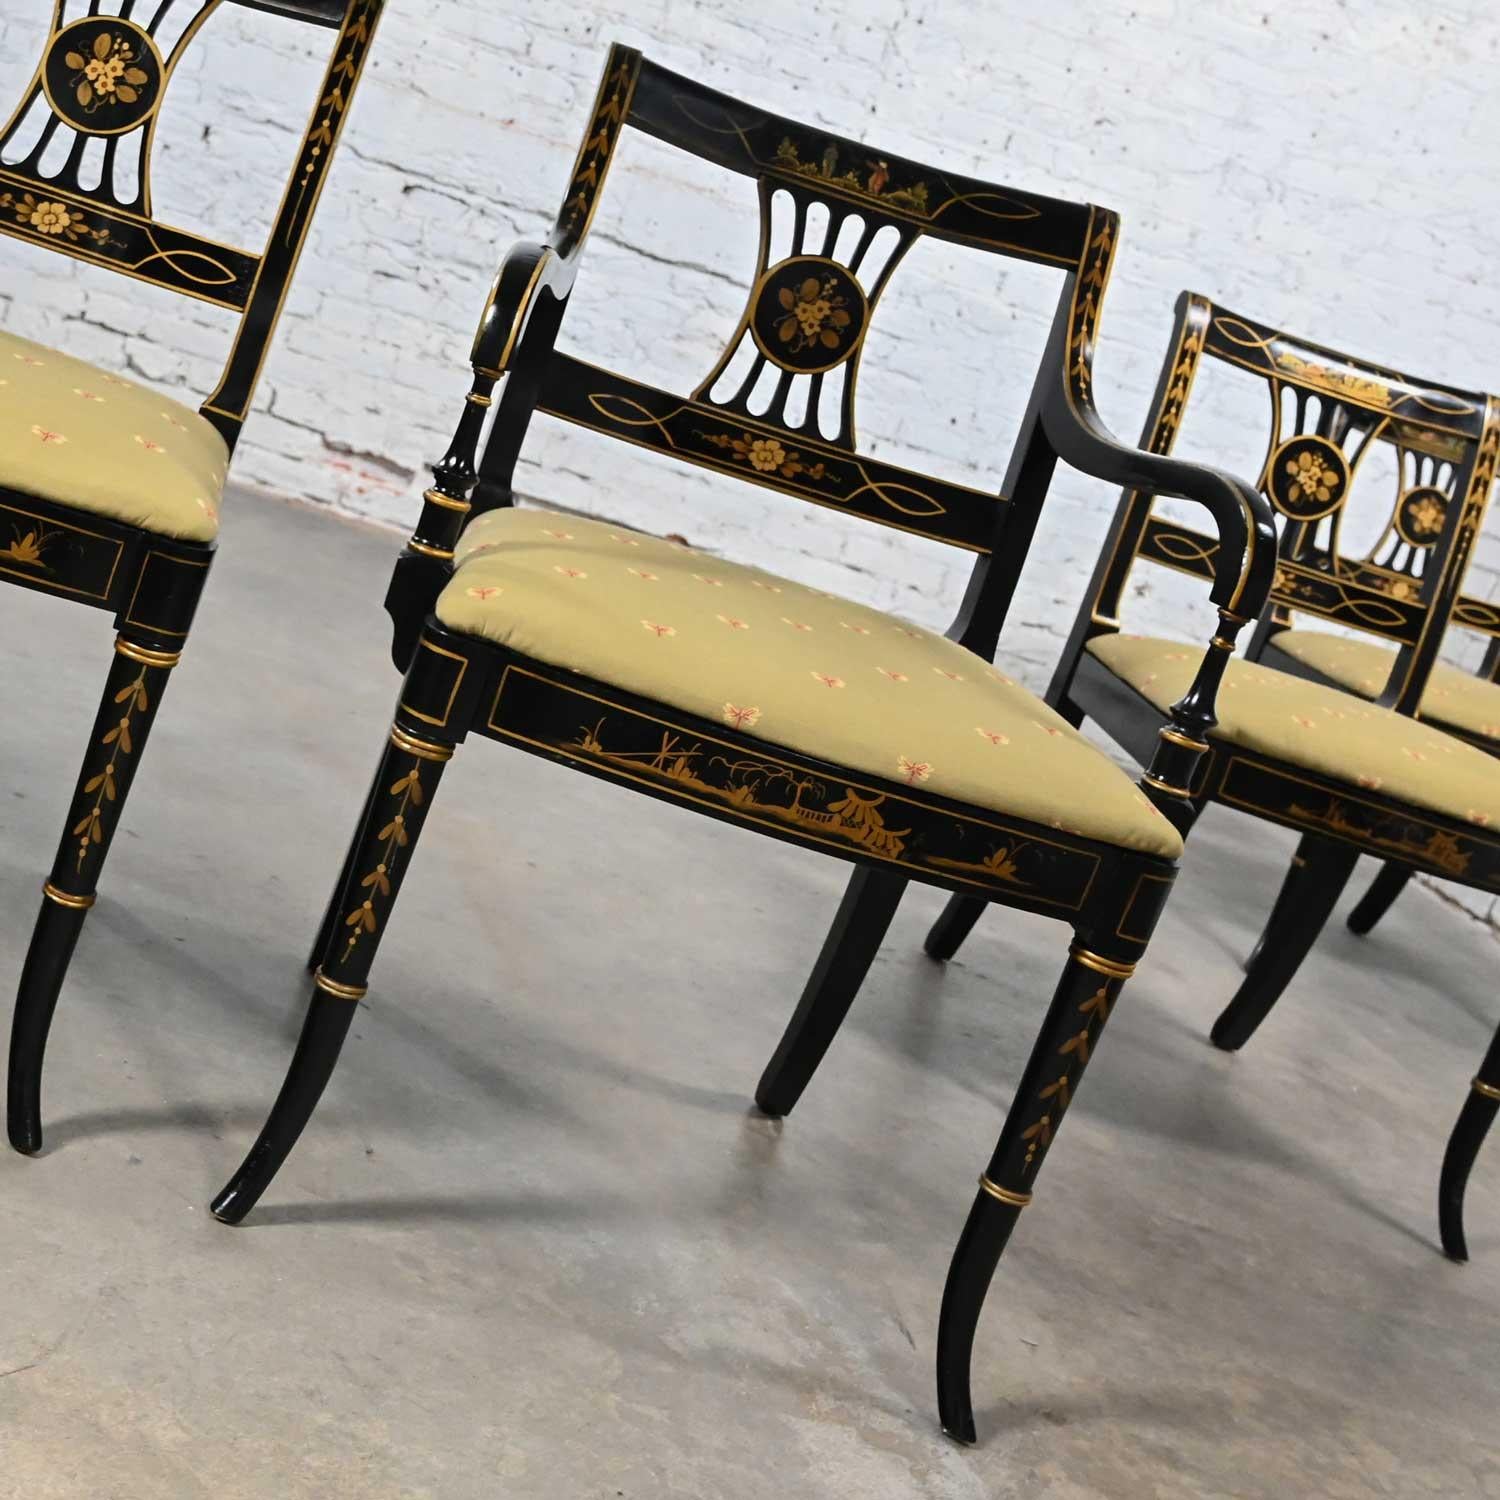 Chinoiserie Regency Style Union National Black & Gilt Dining Chairs Set of 6 For Sale 2